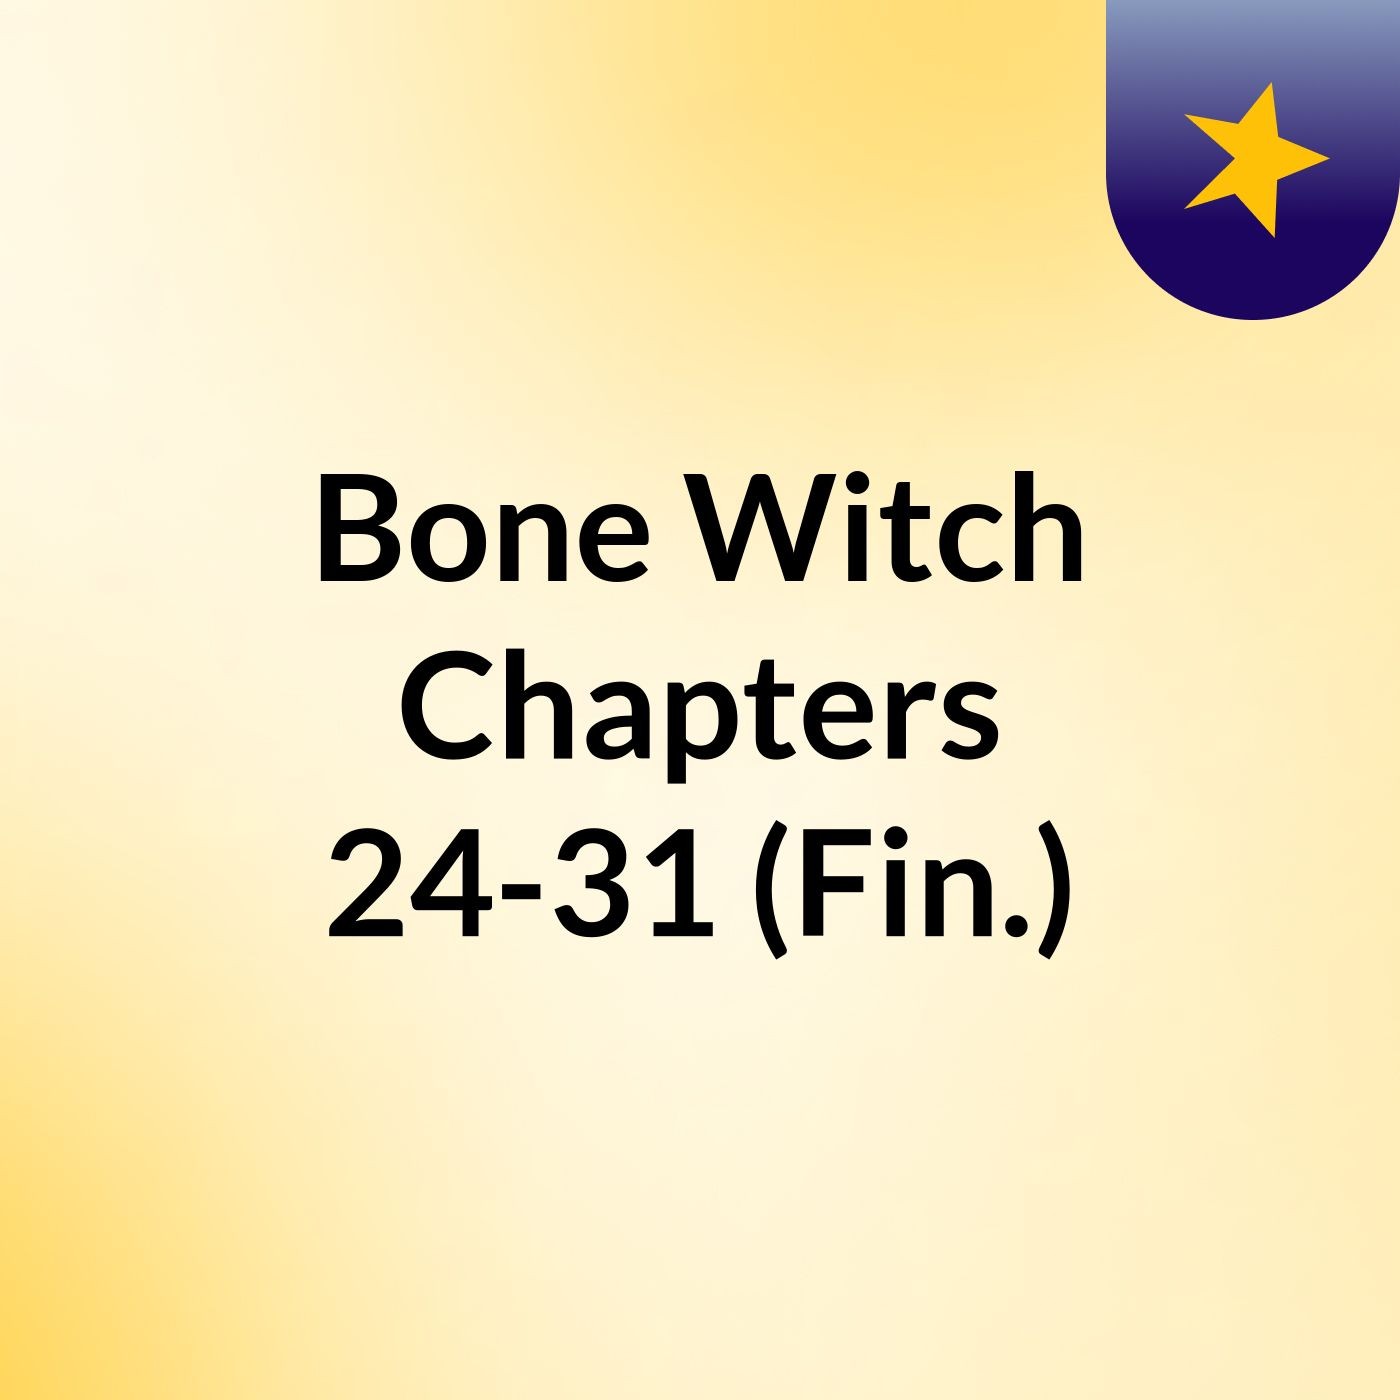 Bone Witch Chapters 24-31 (Fin.)